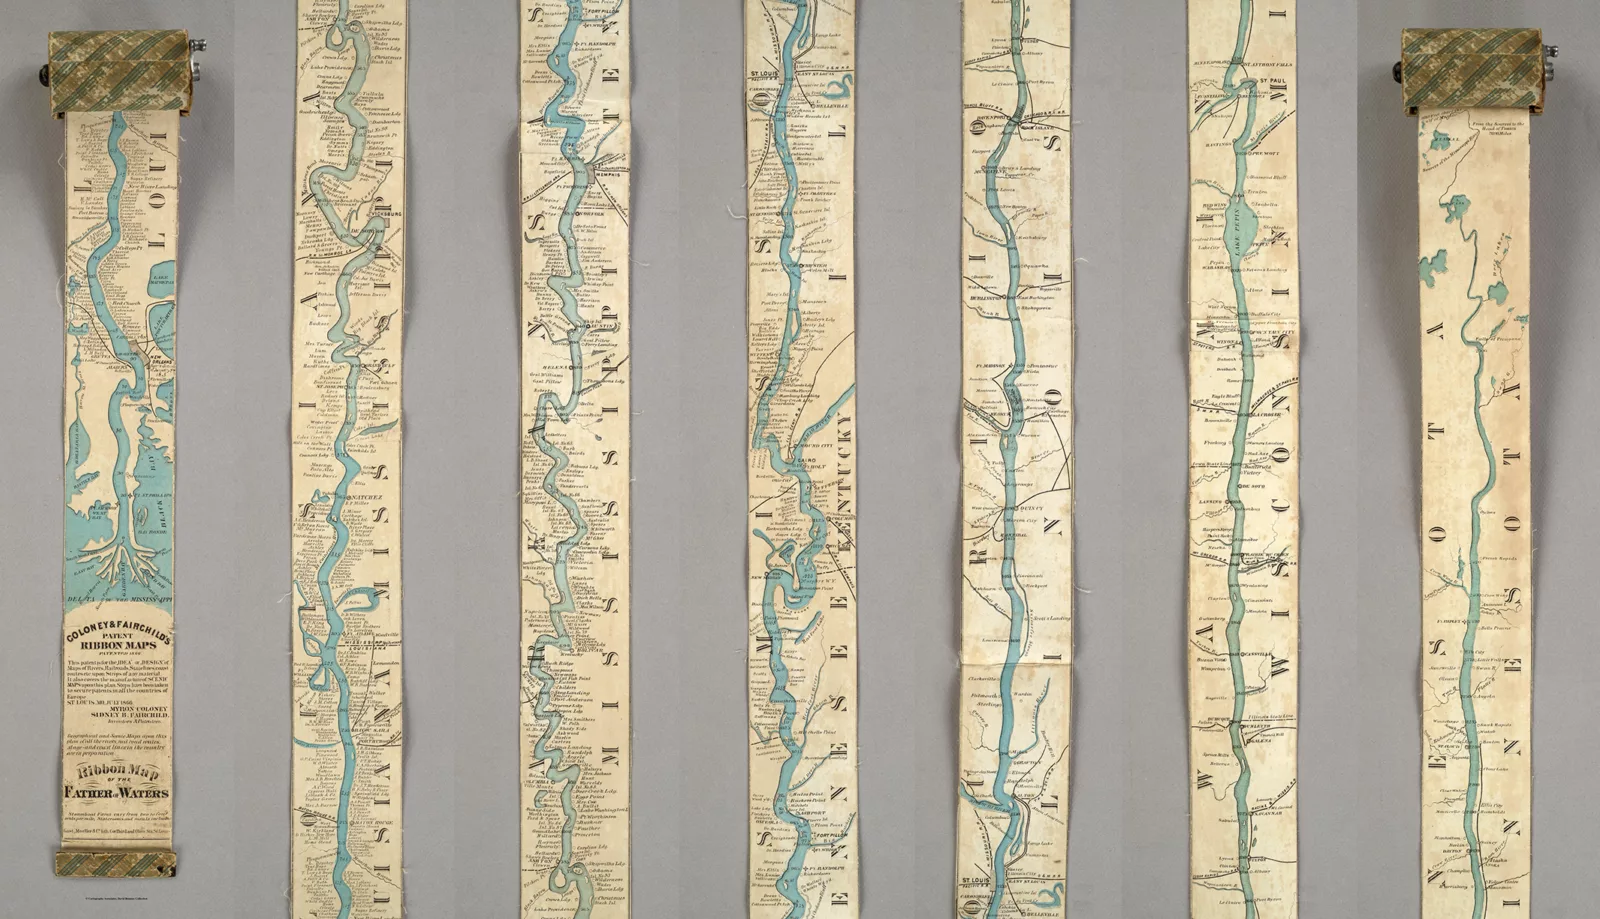 A ribbon map from the 1860s that unspools to show the Mississippi River